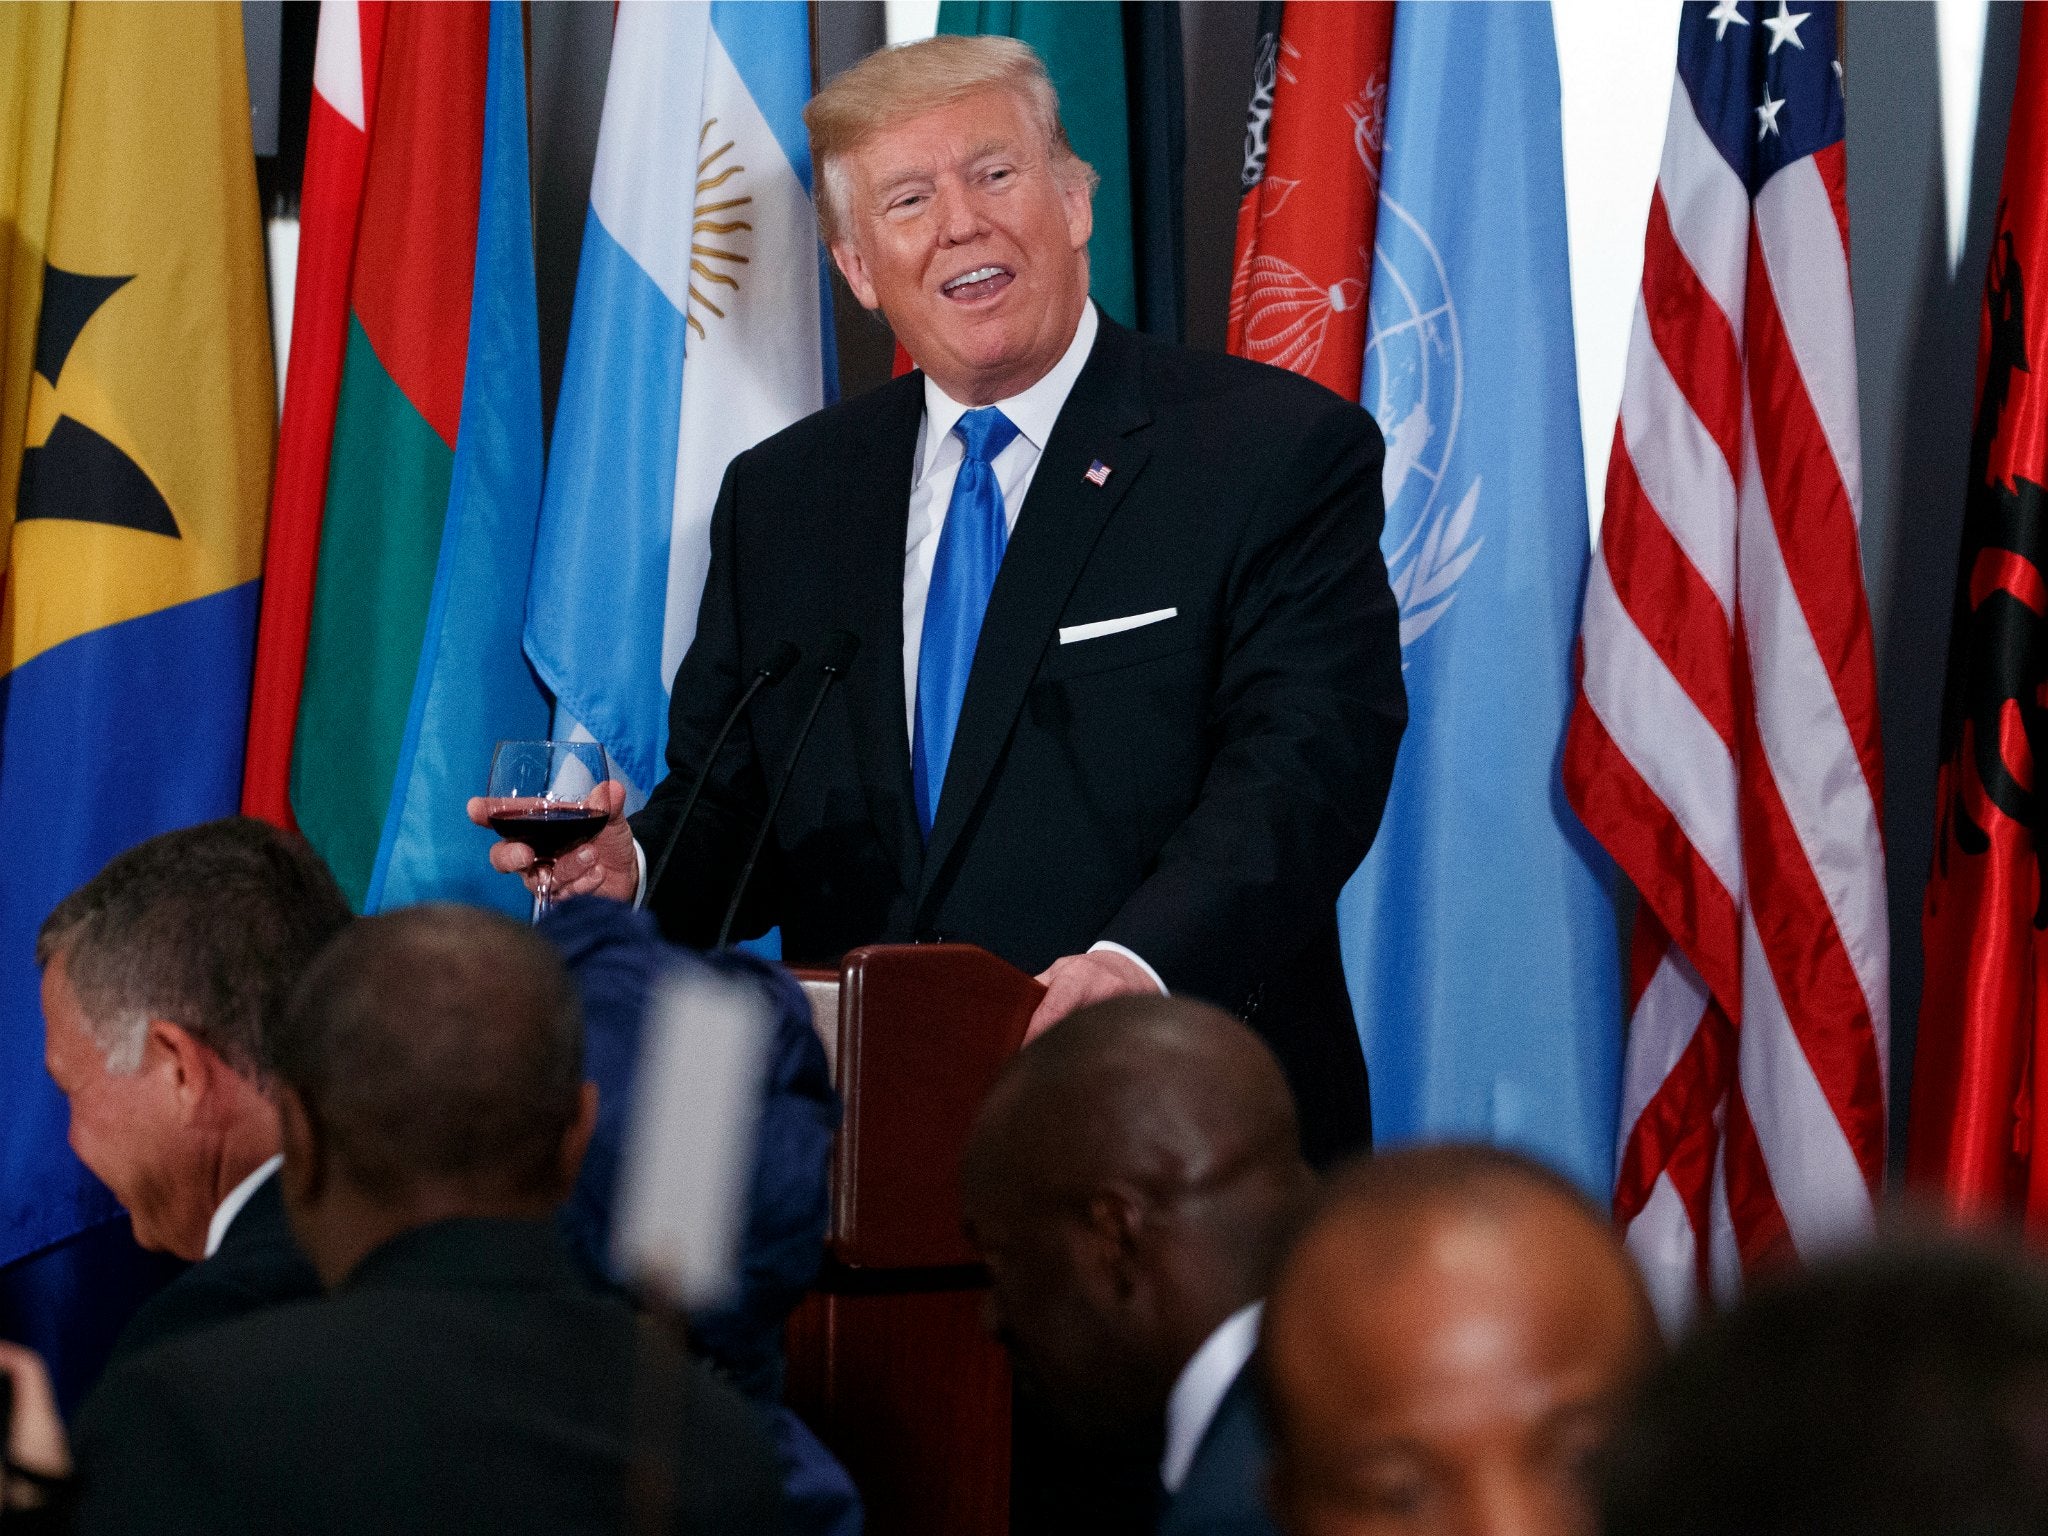 Donald Trump at the United Nations